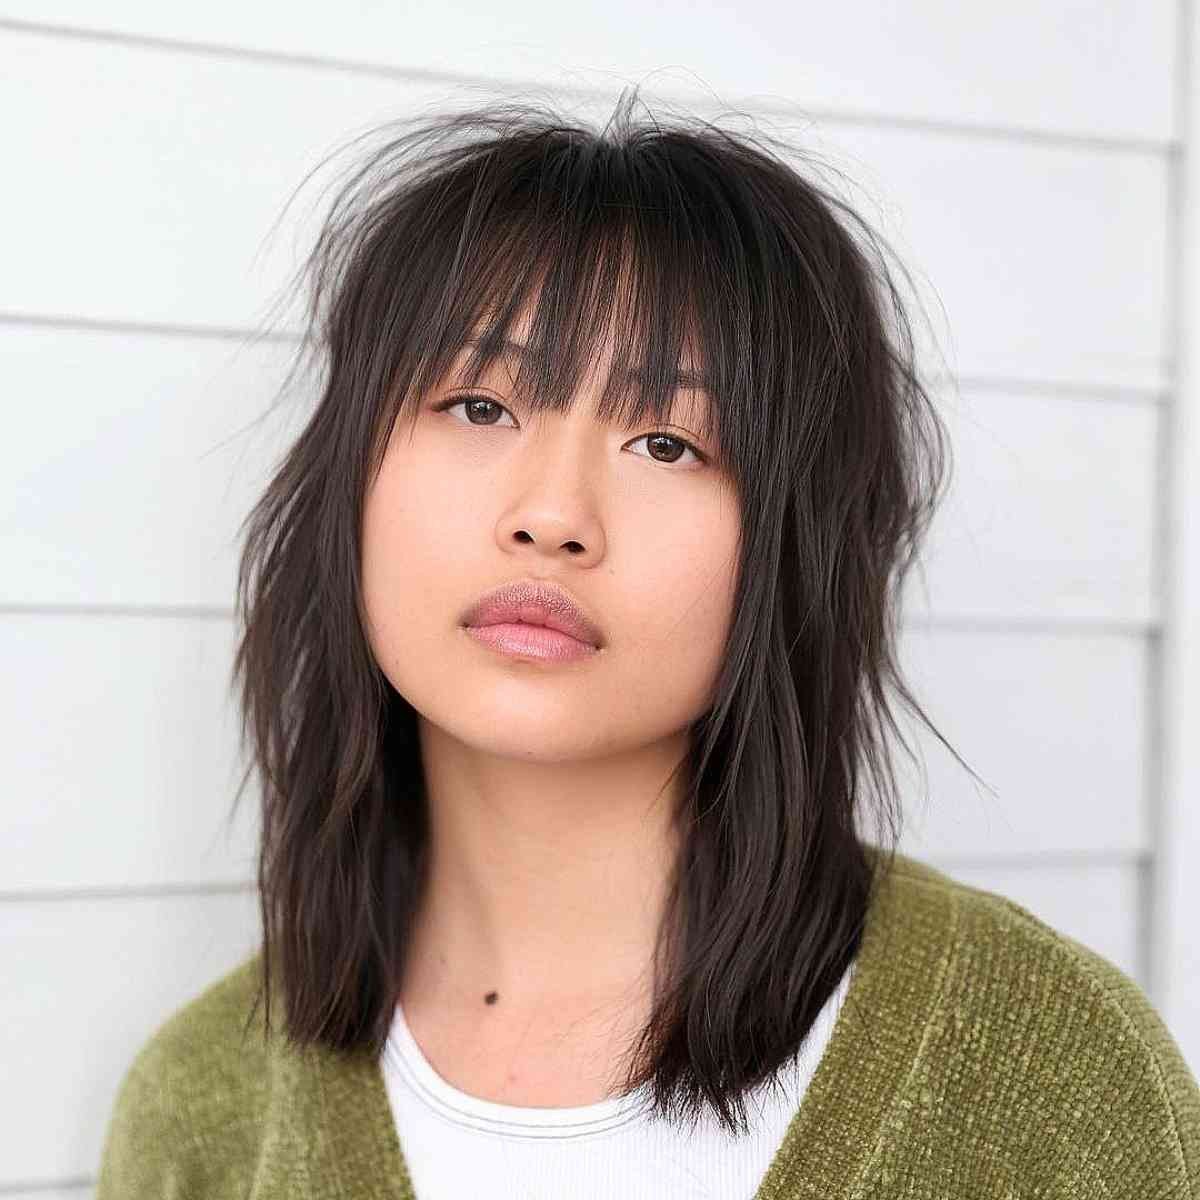 Shaggy shoulder-length haircut with gender neutral wispy bangs